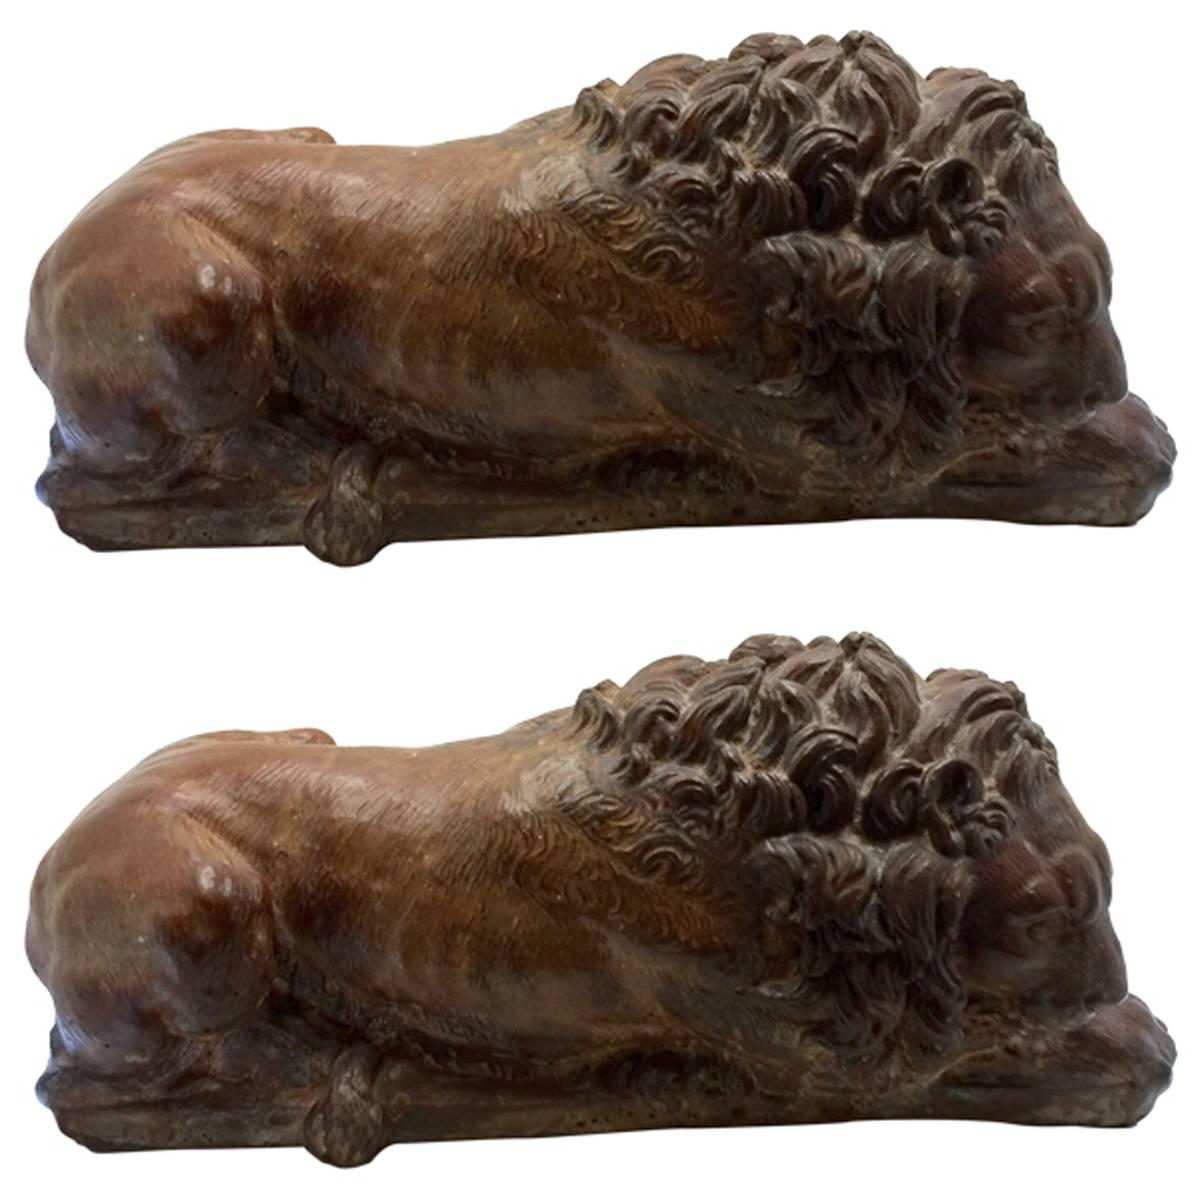 Pair of Terracotta Lions, after Canova, 19th Century